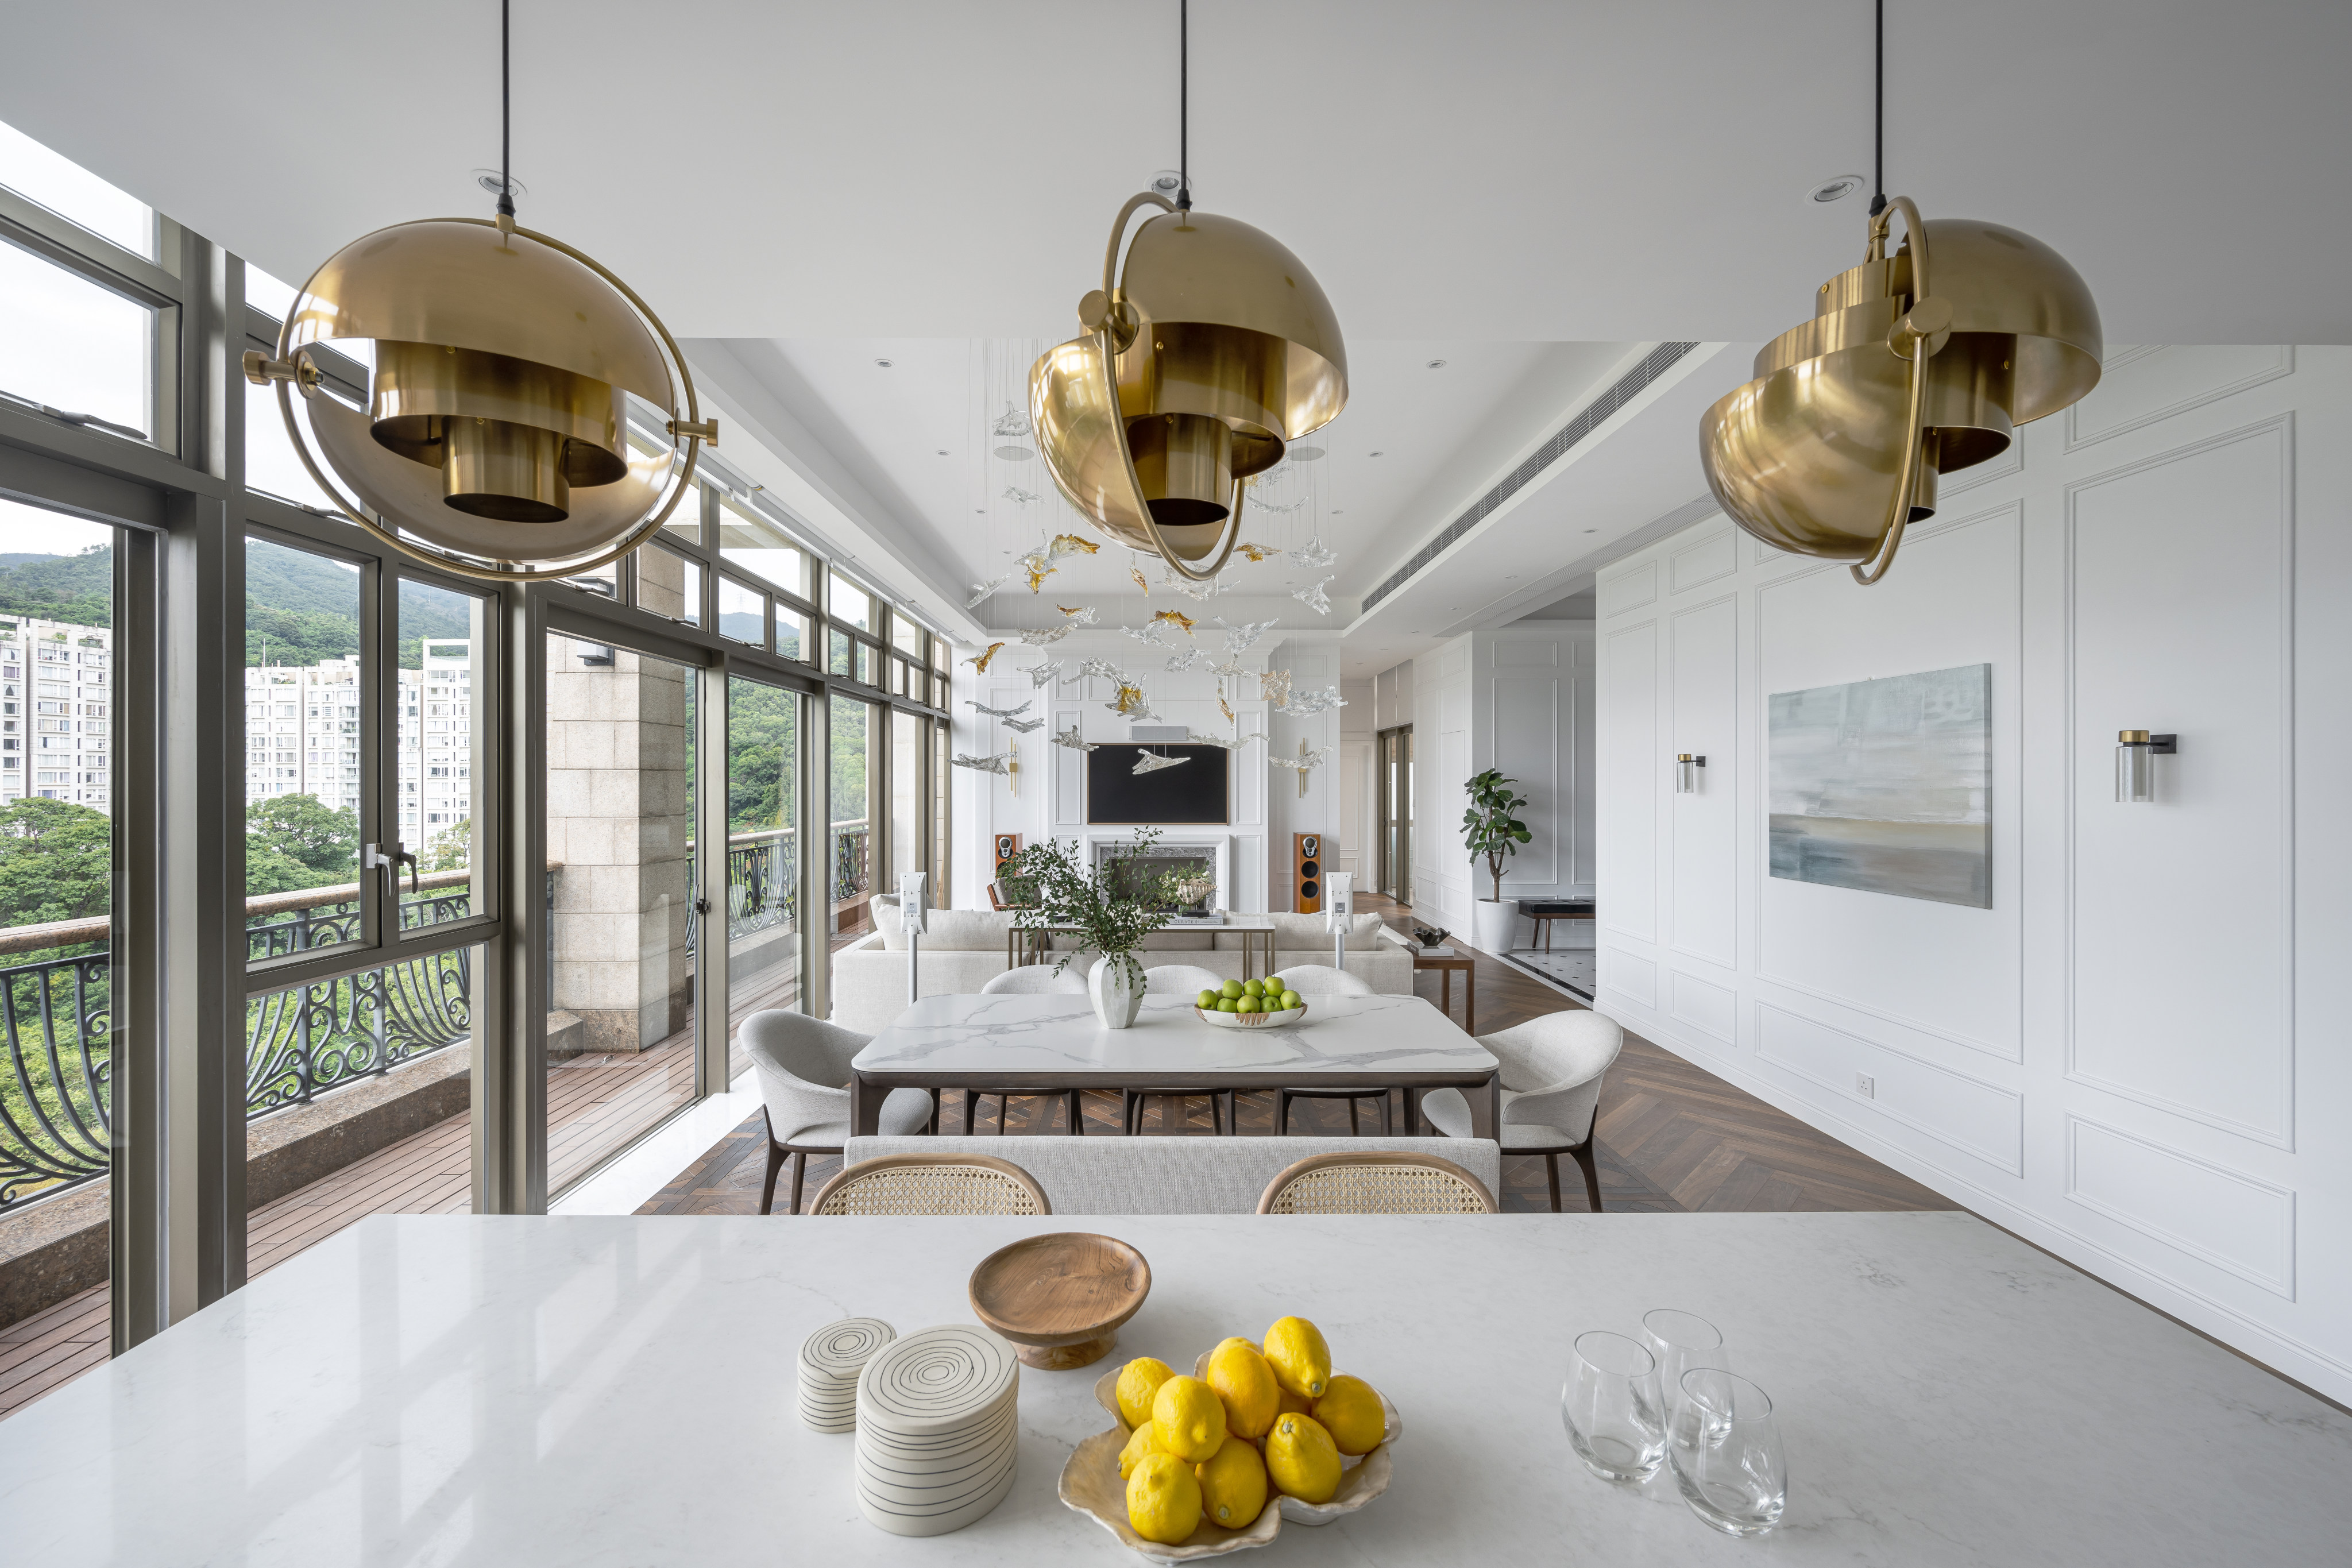 Siatama Kitchen with Japanese and Scandi Influences by H. Miller